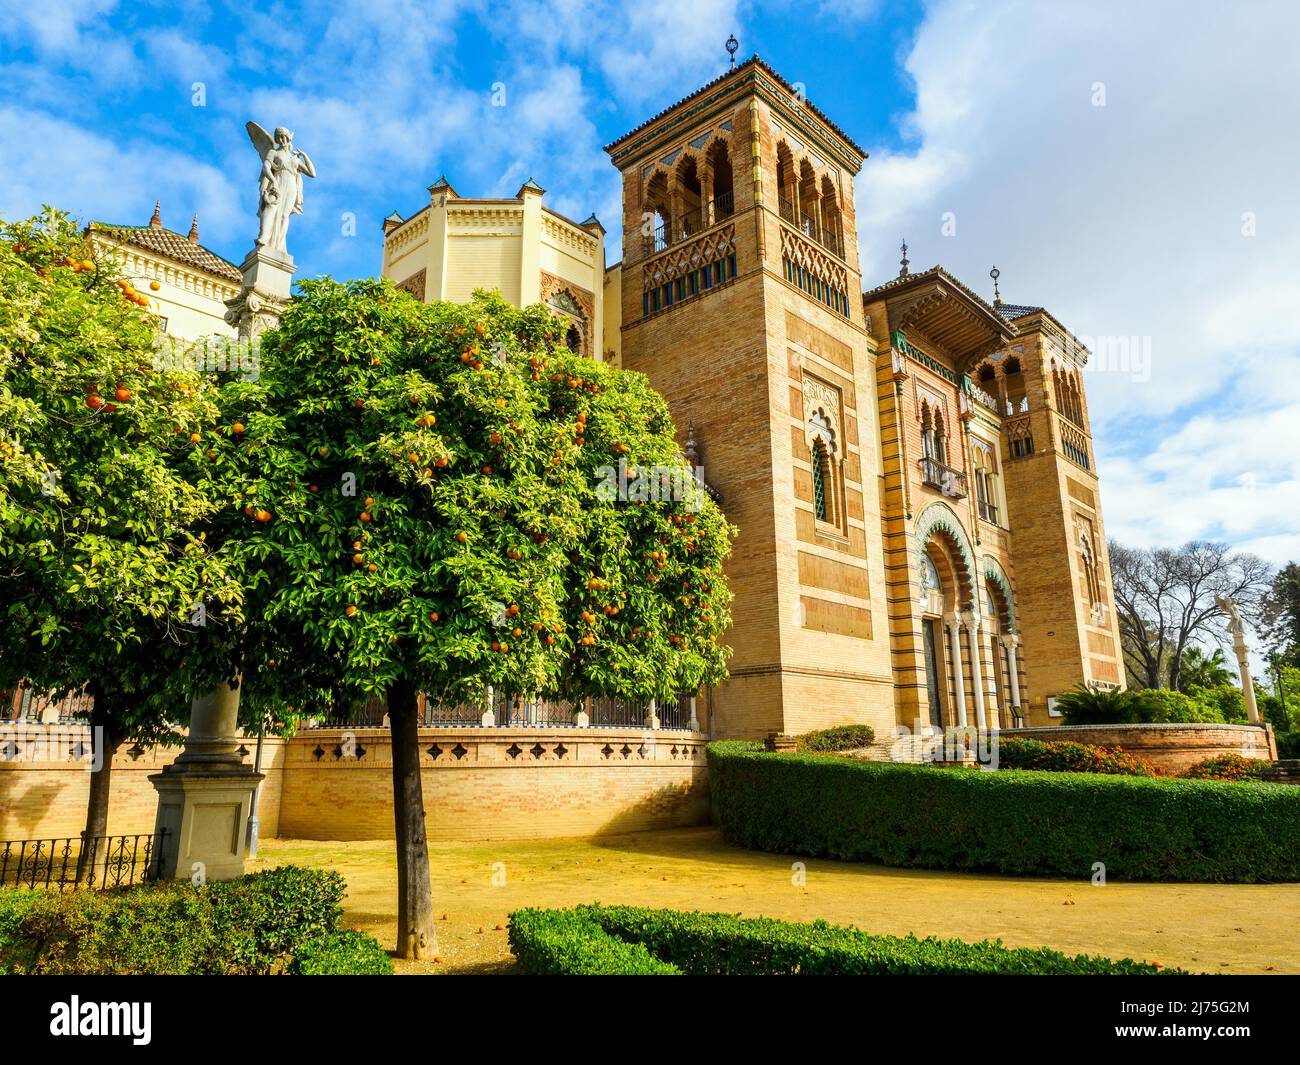 The Mudejar Pavilion designed by Anibal Gonzalez and built in 1914 houses the Museum of Arts and Popular Customs of Seville (Museo del Artes y Costumbres Populares) in Maria Luisa Park - Seville, Spain Stock Photo